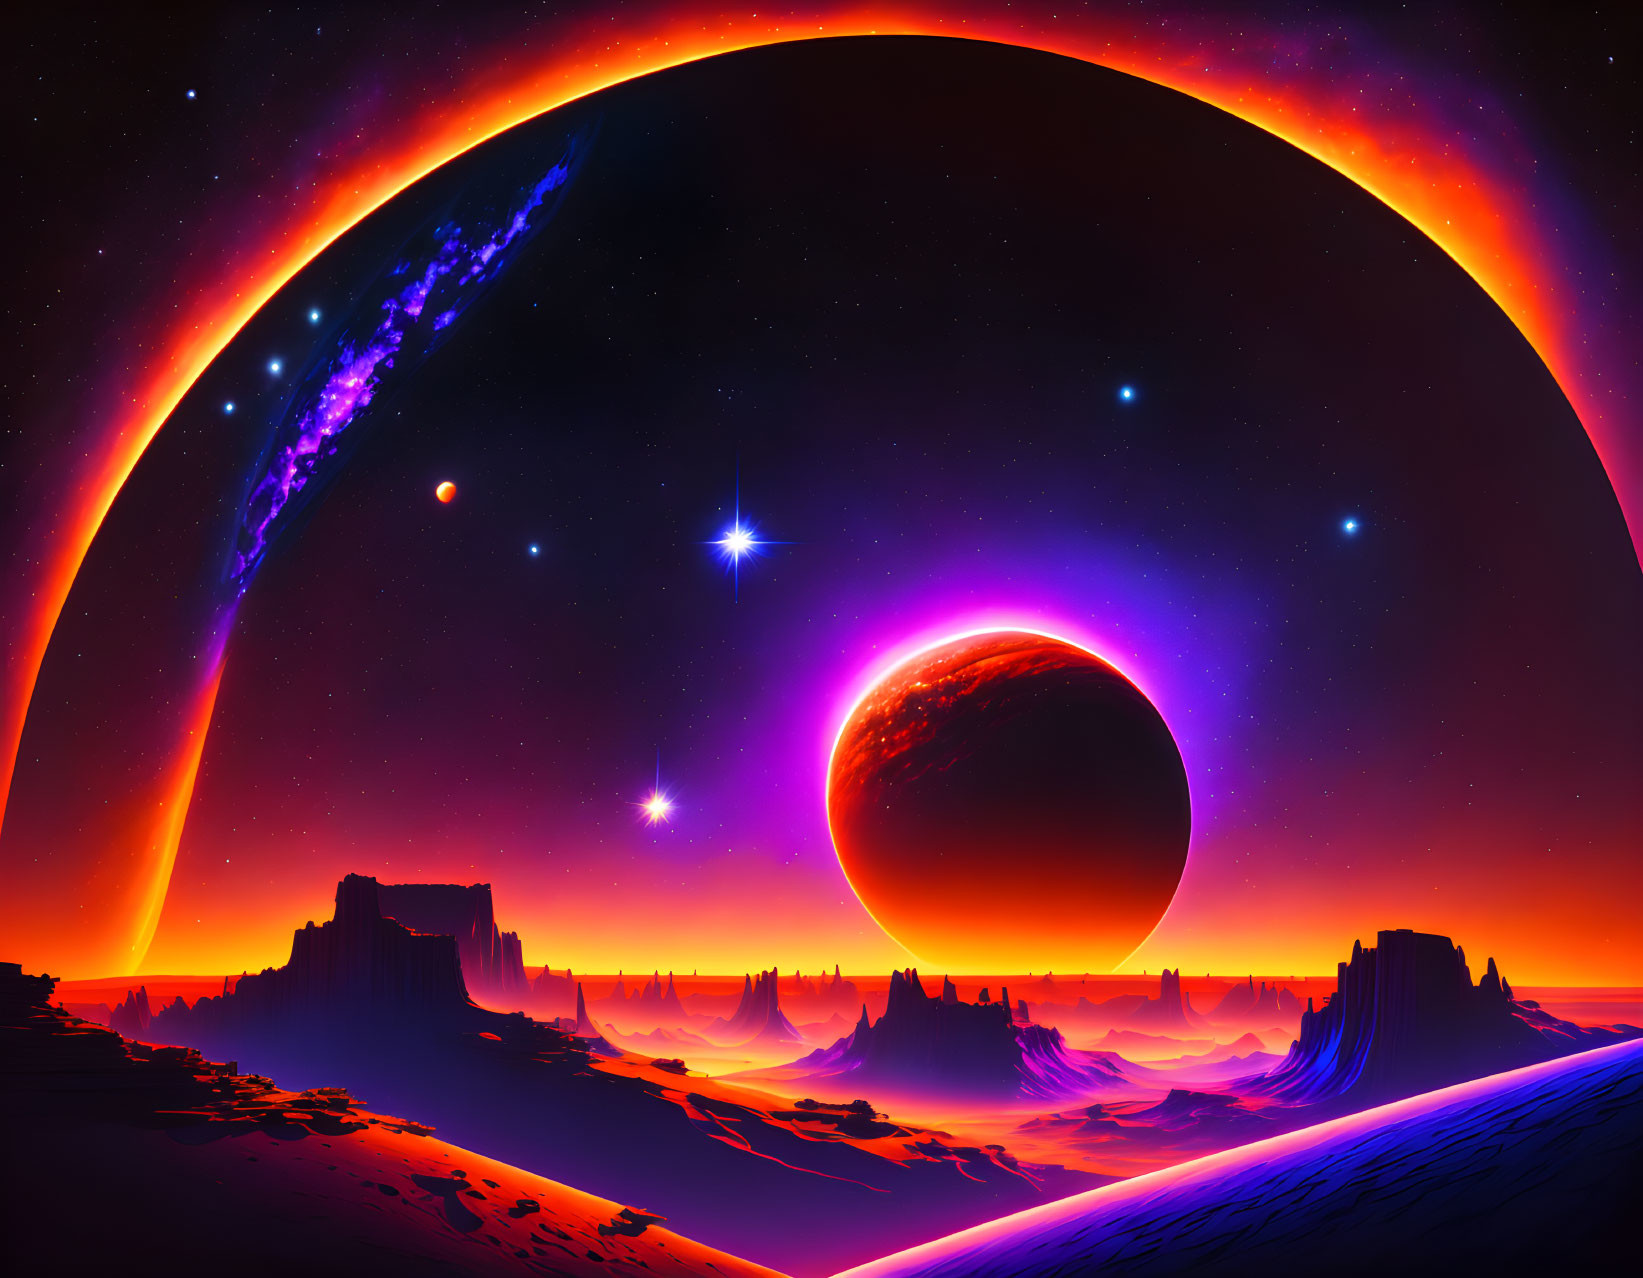 Futuristic sci-fi landscape with red planet, starry sky, galaxy, alien terrain, and